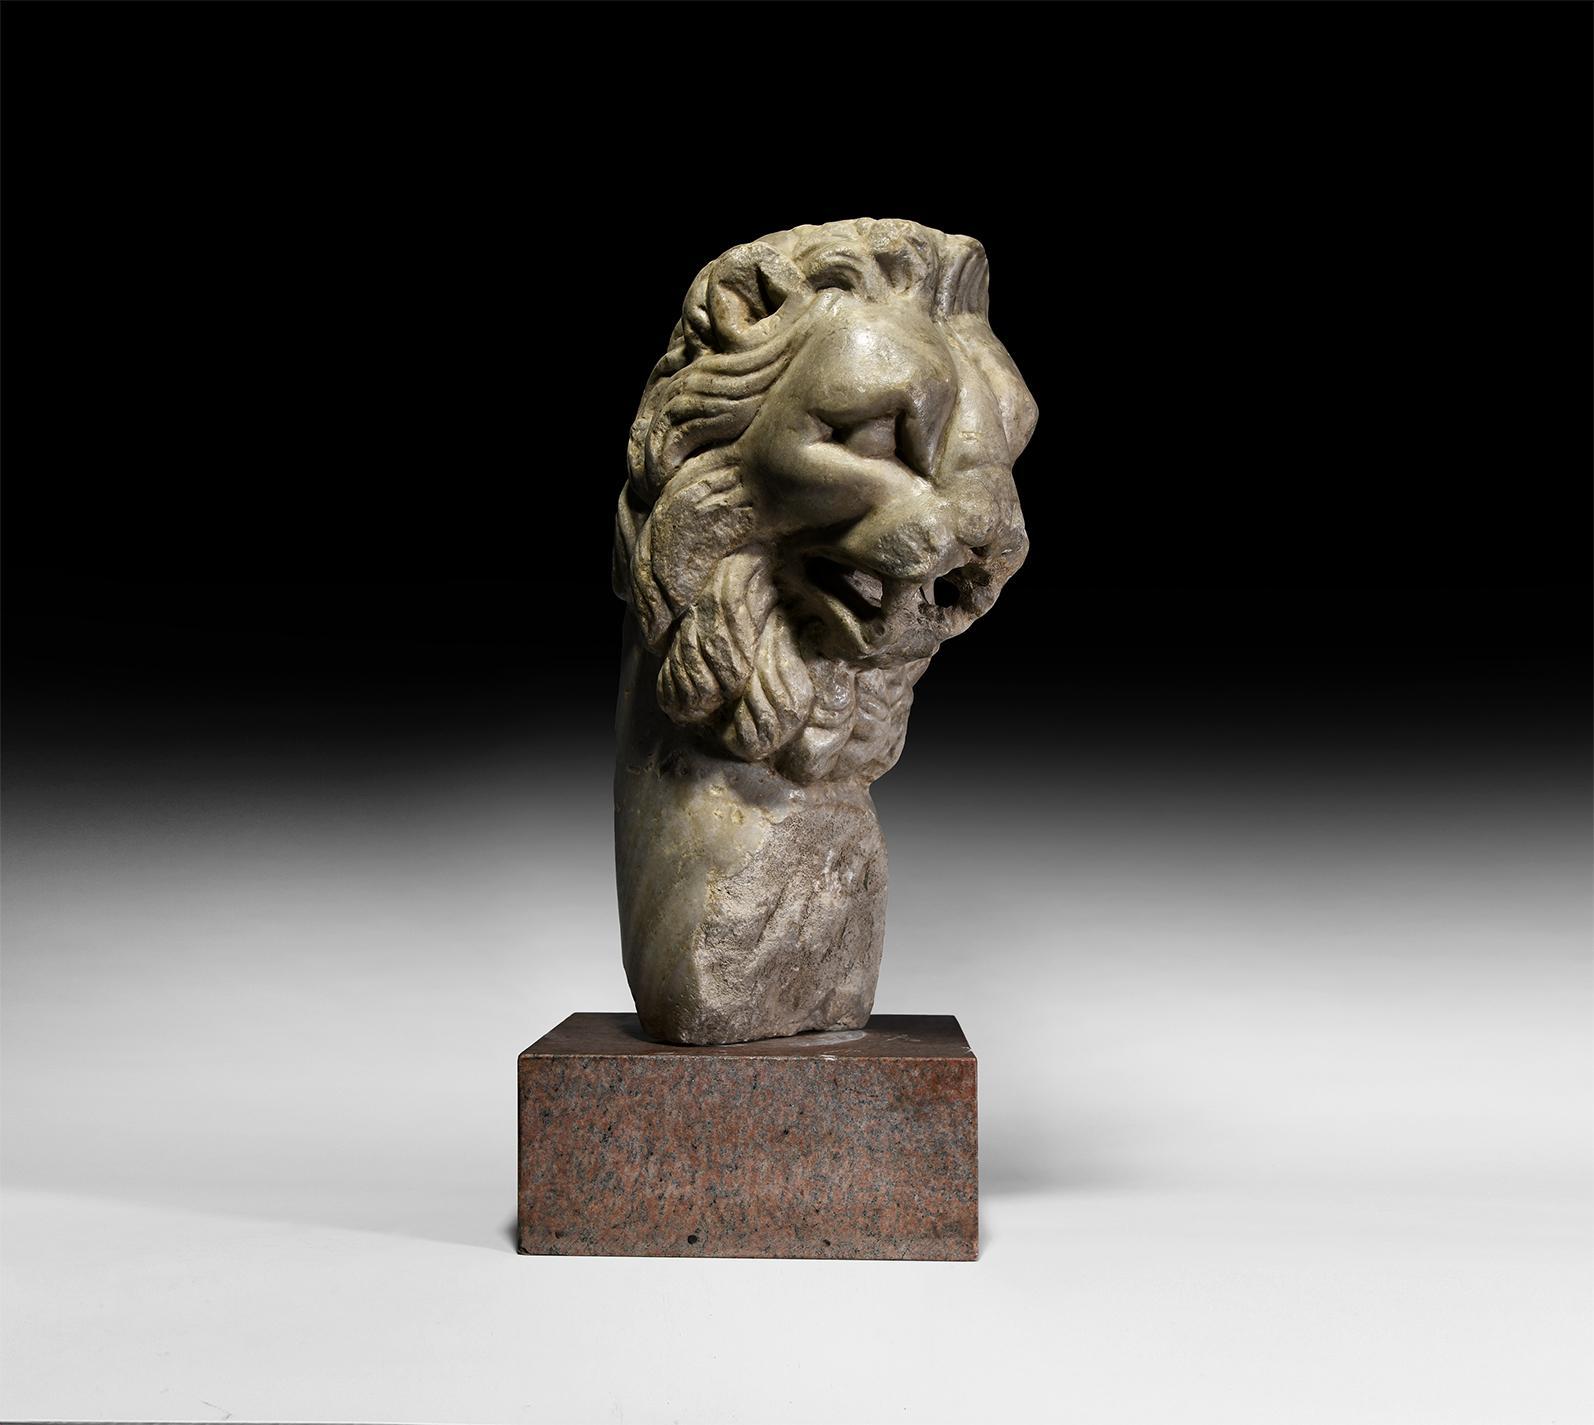 Unknown Figurative Sculpture - ANCIENT MONUMENTAL MARBLE LION FOUNTAIN HEAD ROMAN EMPIRE 1ST/2ND CENTURY AD